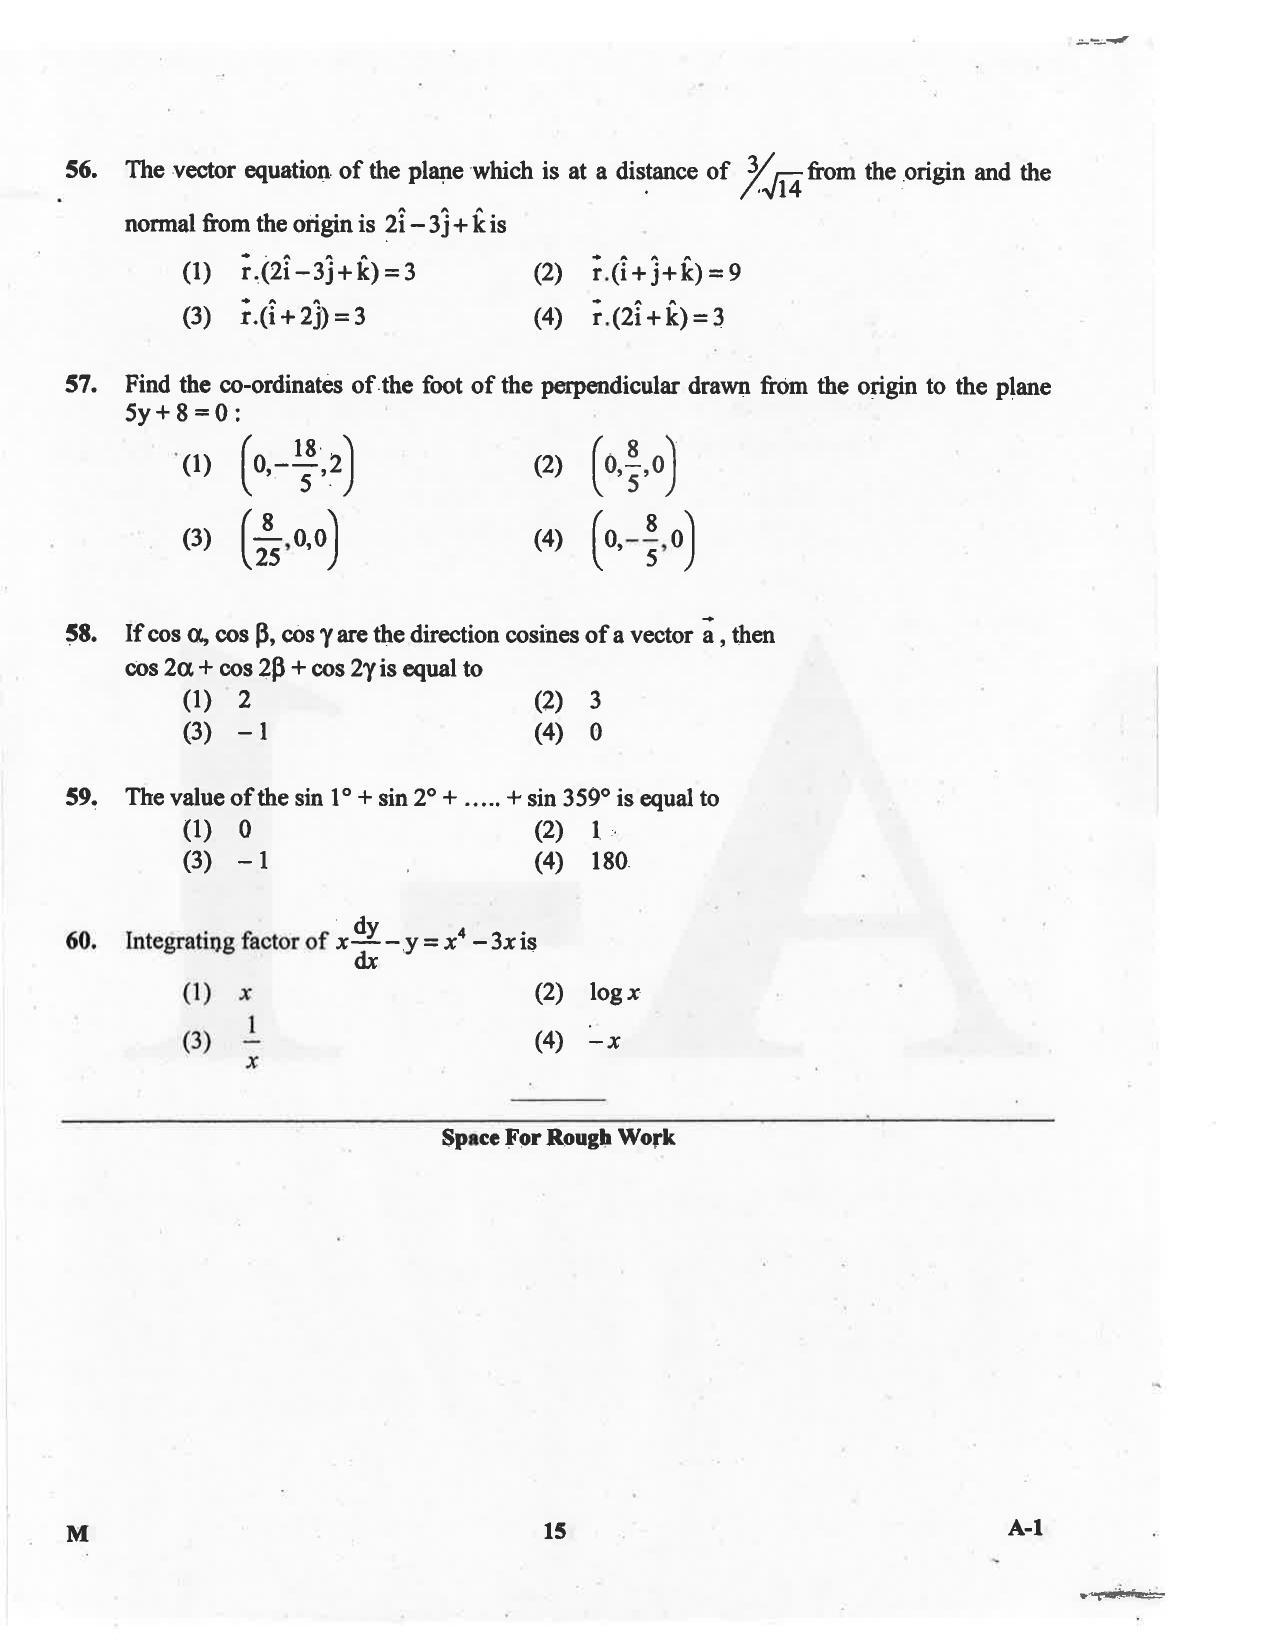 KCET Mathematics 2016 Question Papers - Page 15